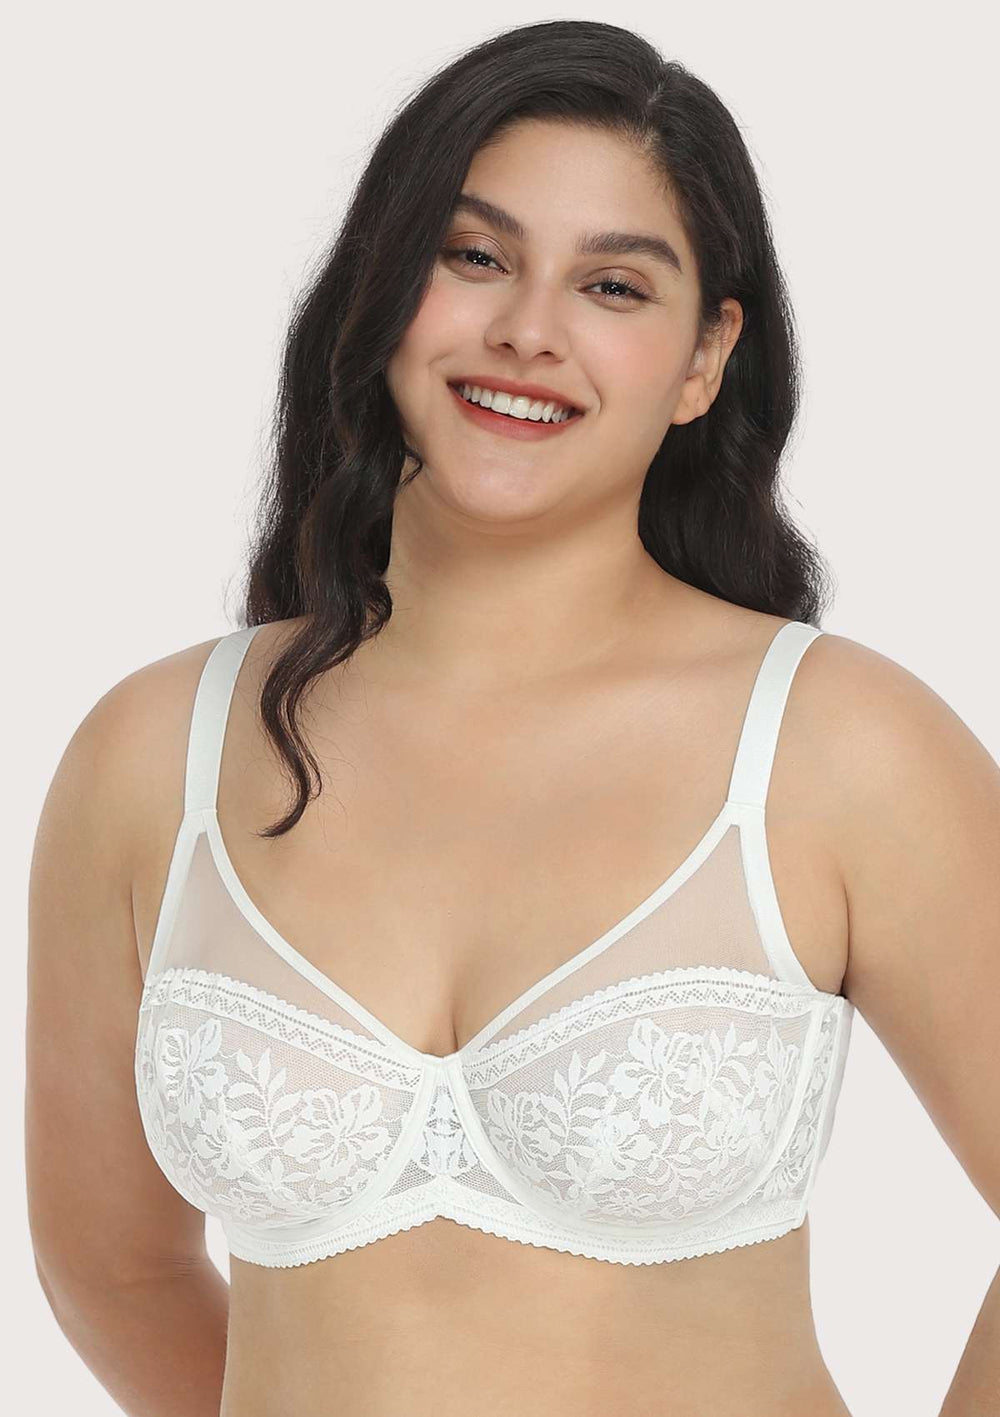 Zivame - Give your gorgeous curves the loving definition